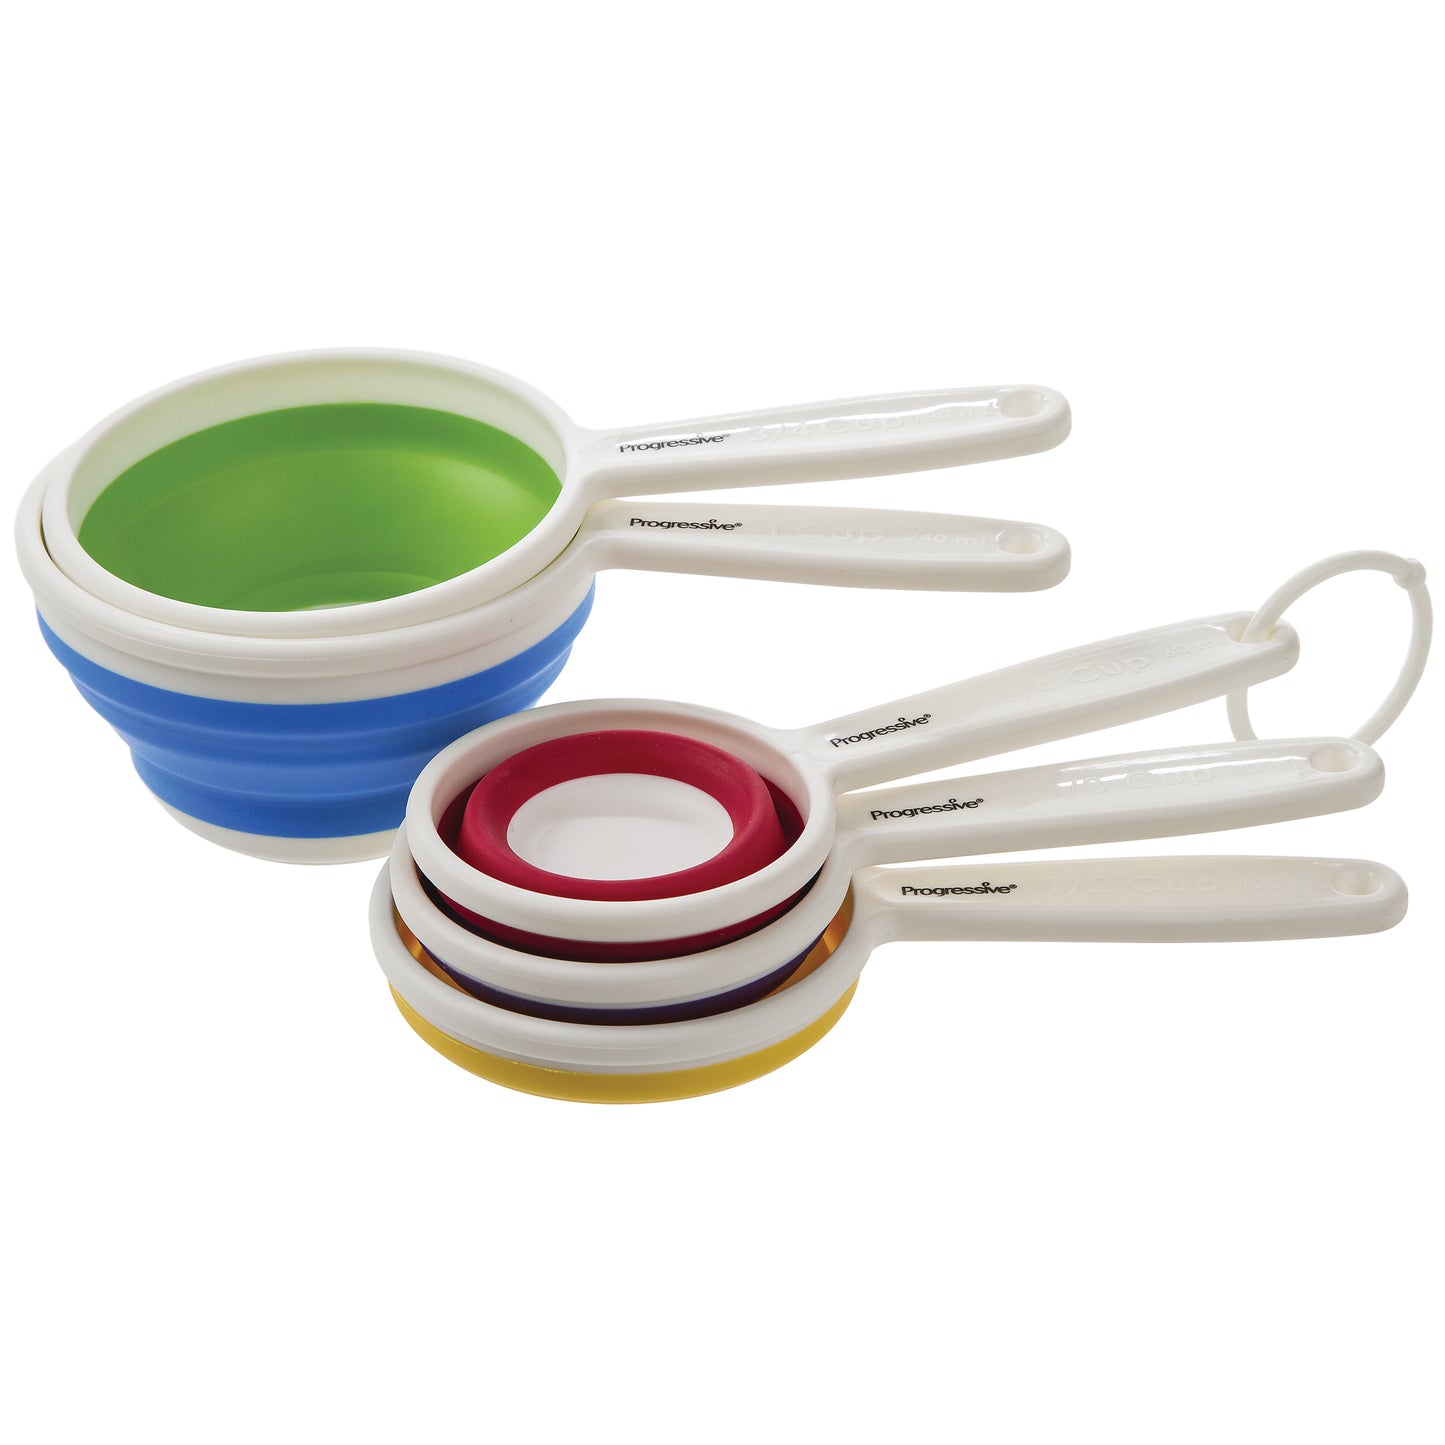 5 Piece Collapsible Measuring Cups